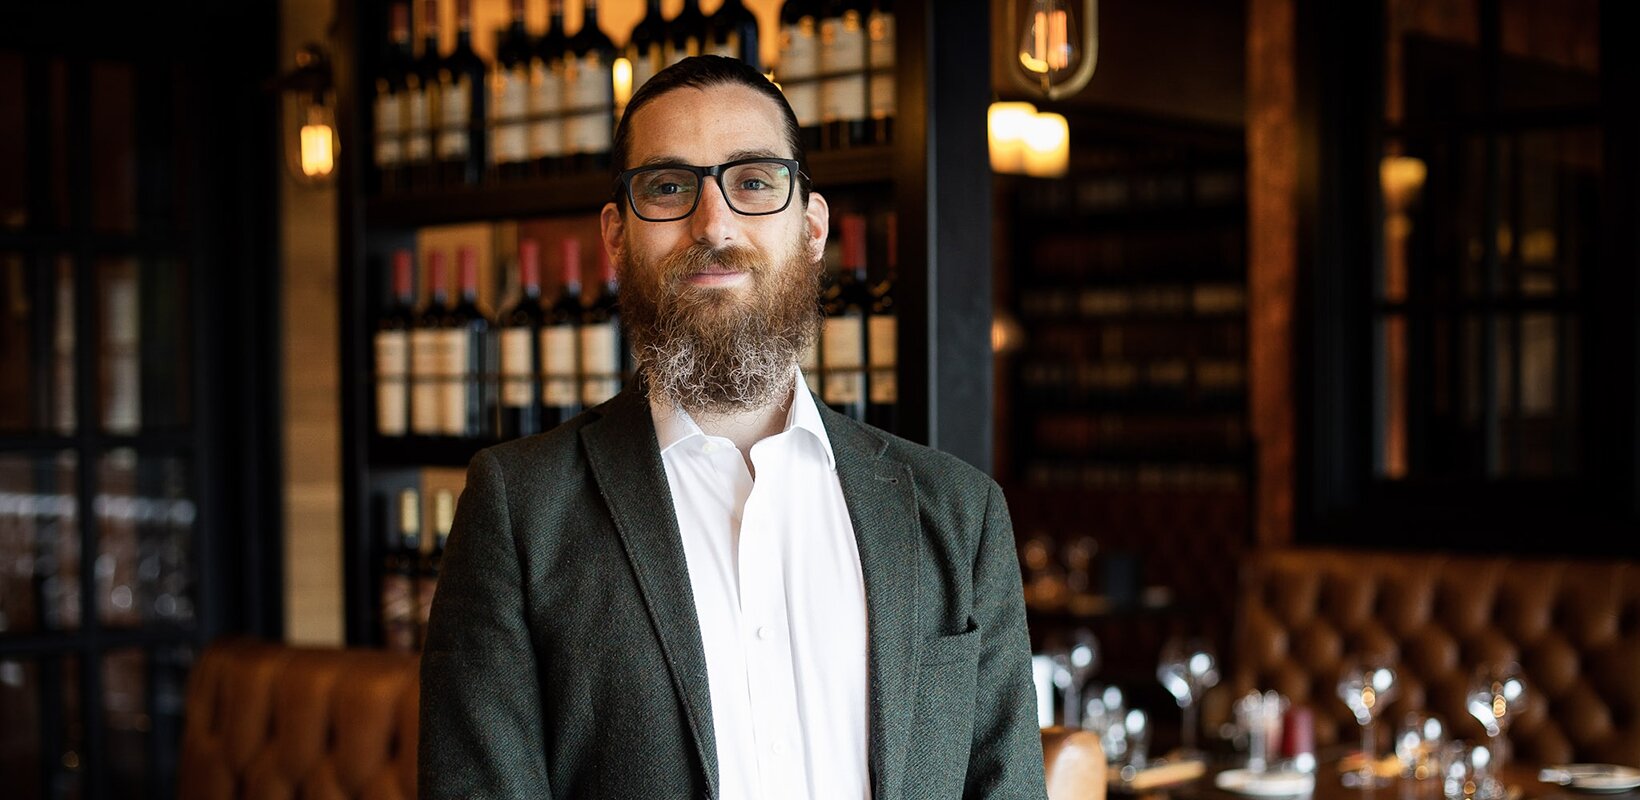 'People see the value in it': Tomas Maunier explains Fazenda's secret to success